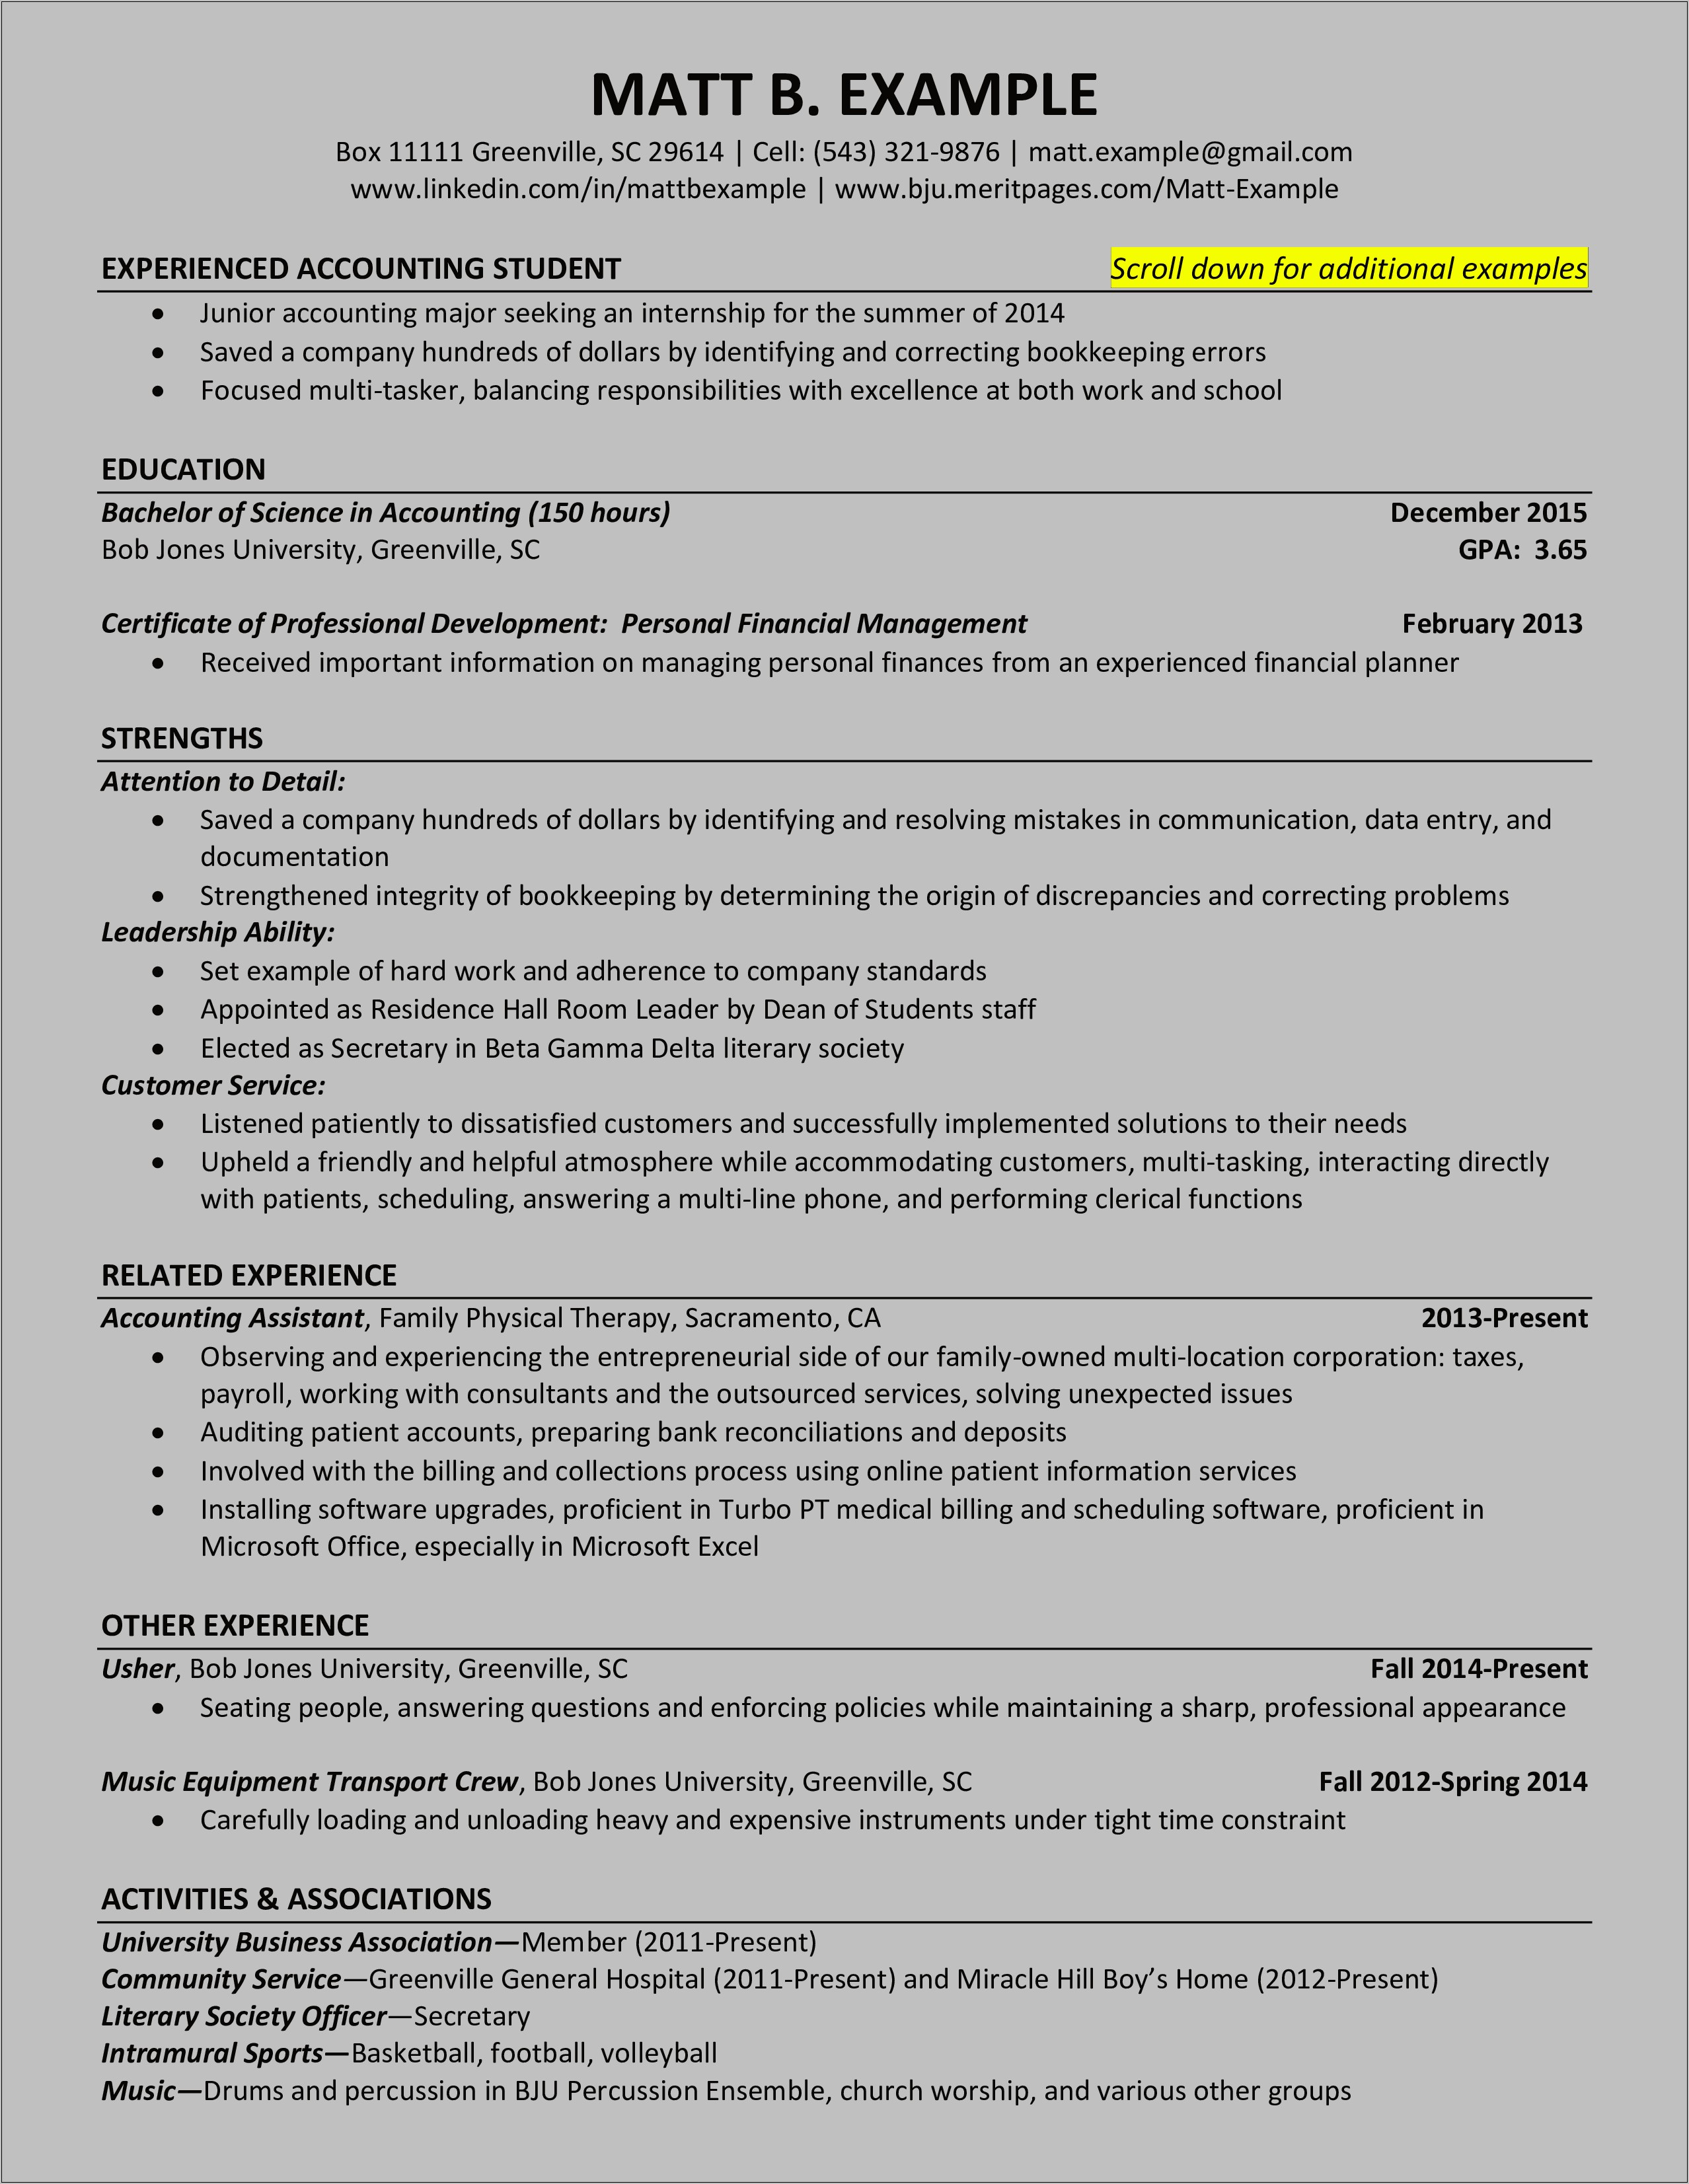 Accounting Student Resume For Government Jobs